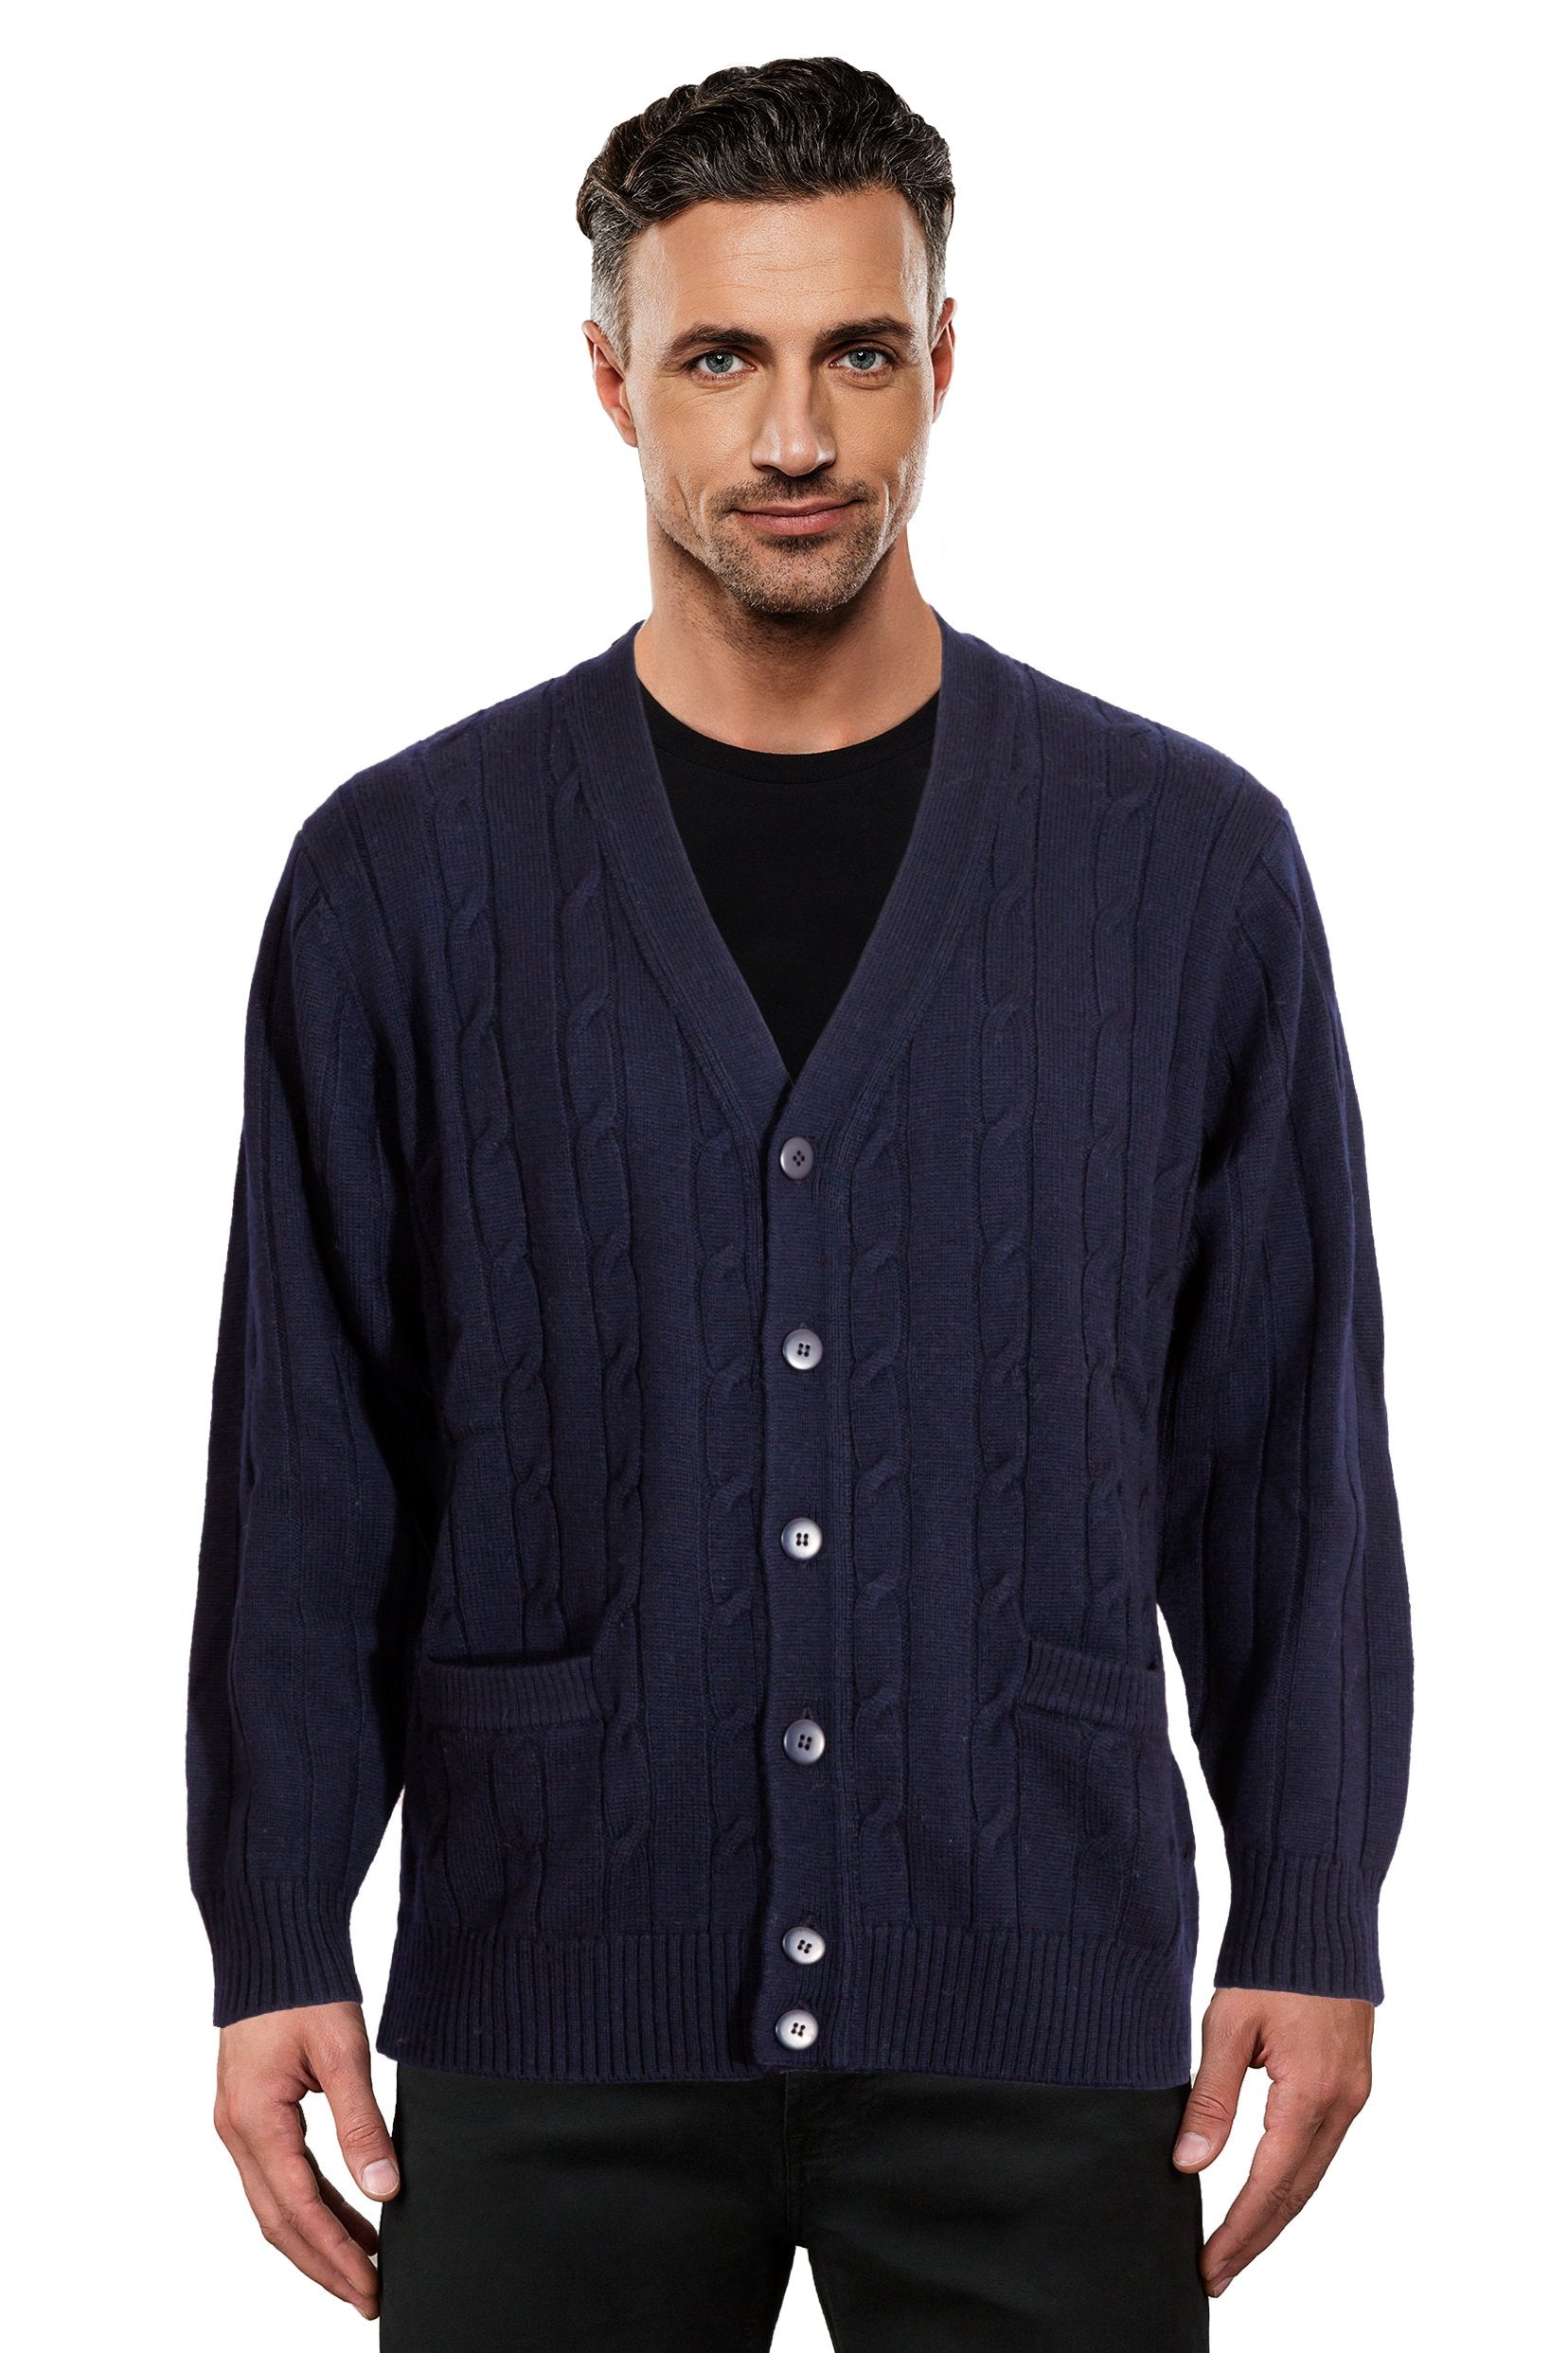 Navy V Neck Cable Knit Cardigan - Sweaters Australia